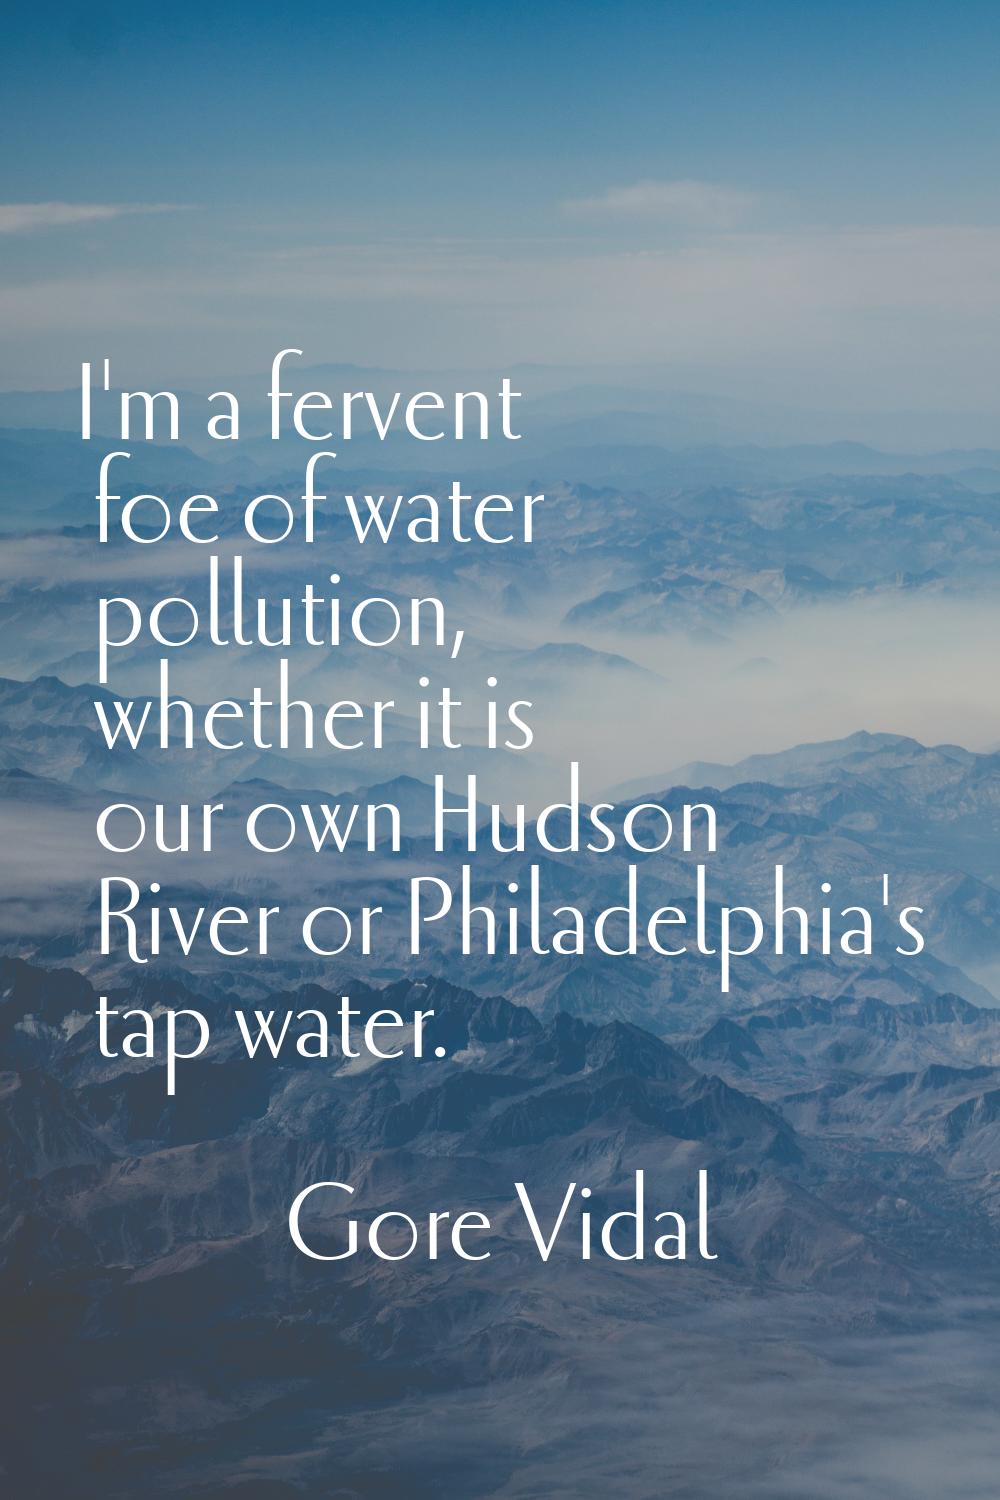 I'm a fervent foe of water pollution, whether it is our own Hudson River or Philadelphia's tap wate